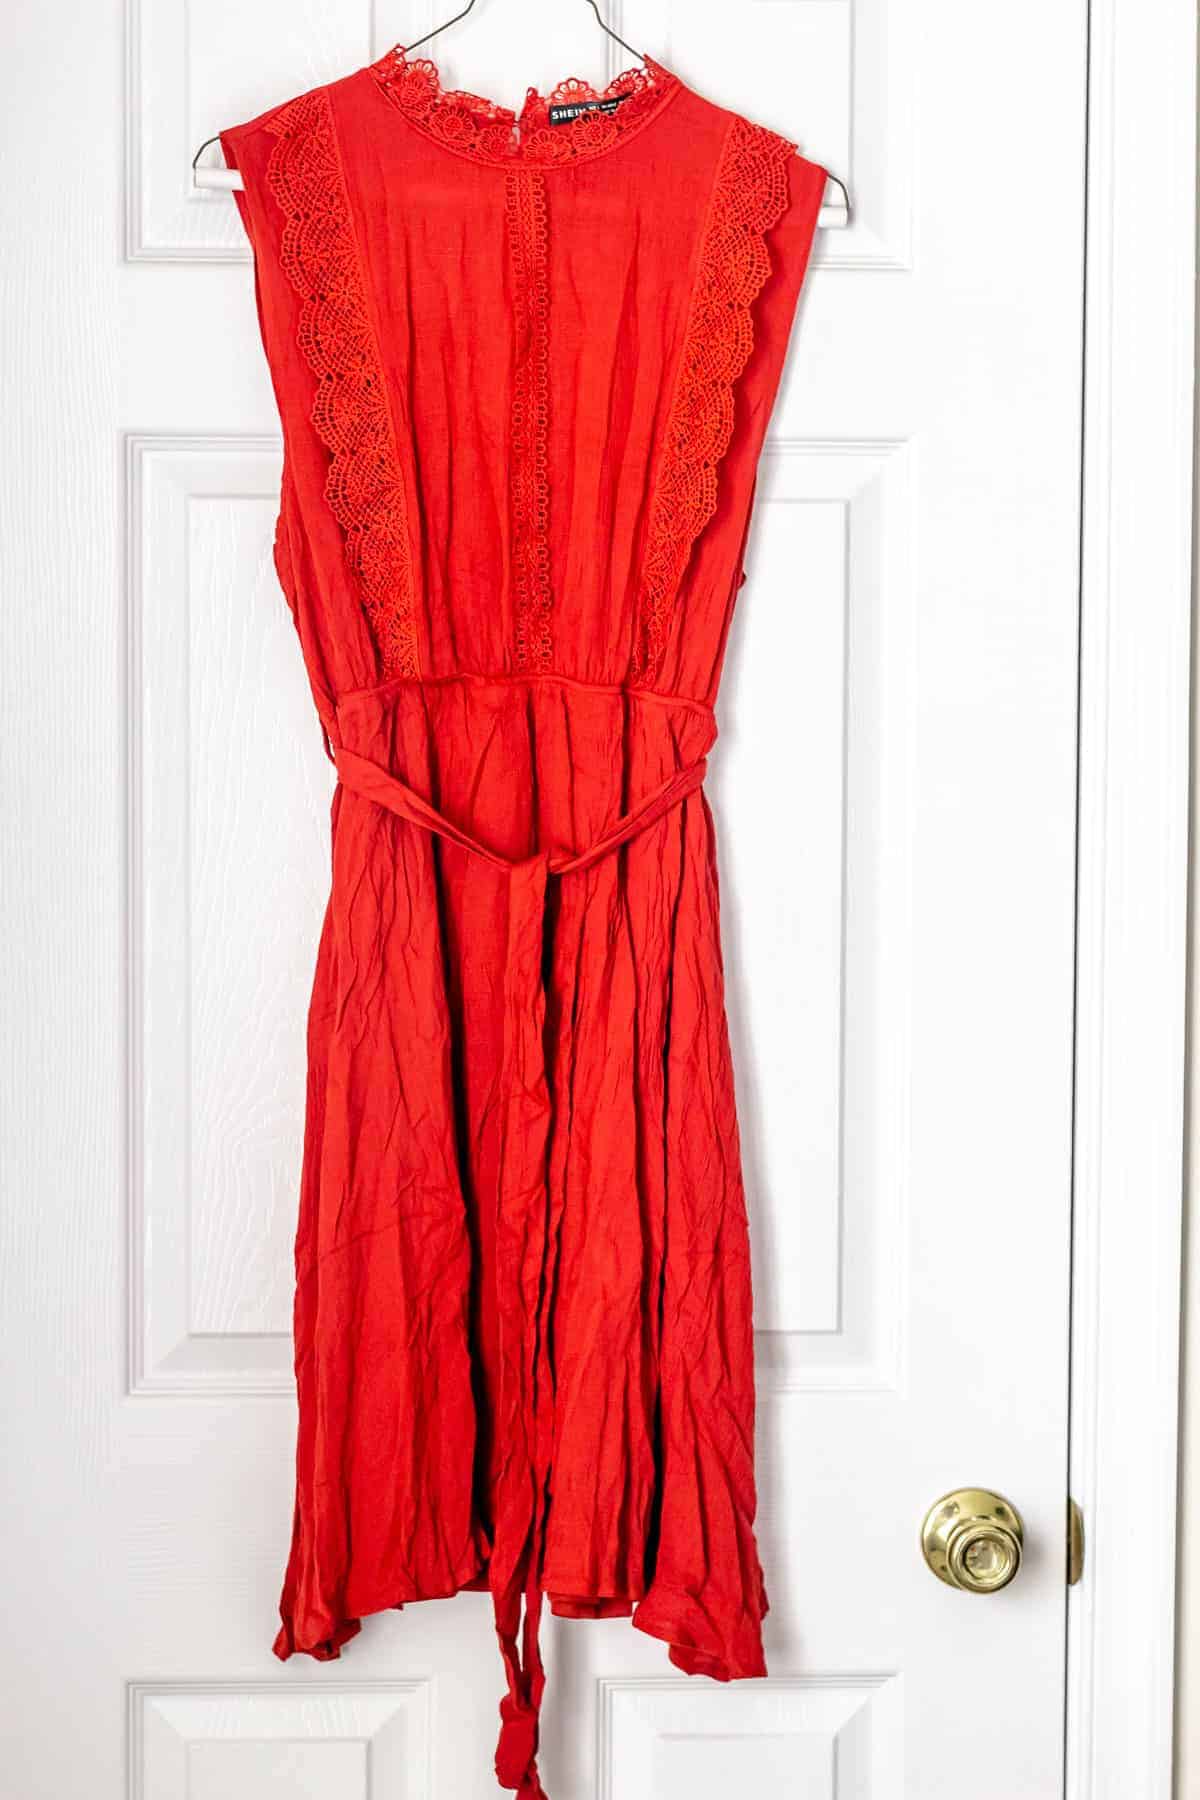 Contrast Lace Belted A-line Dress in red on a hanger